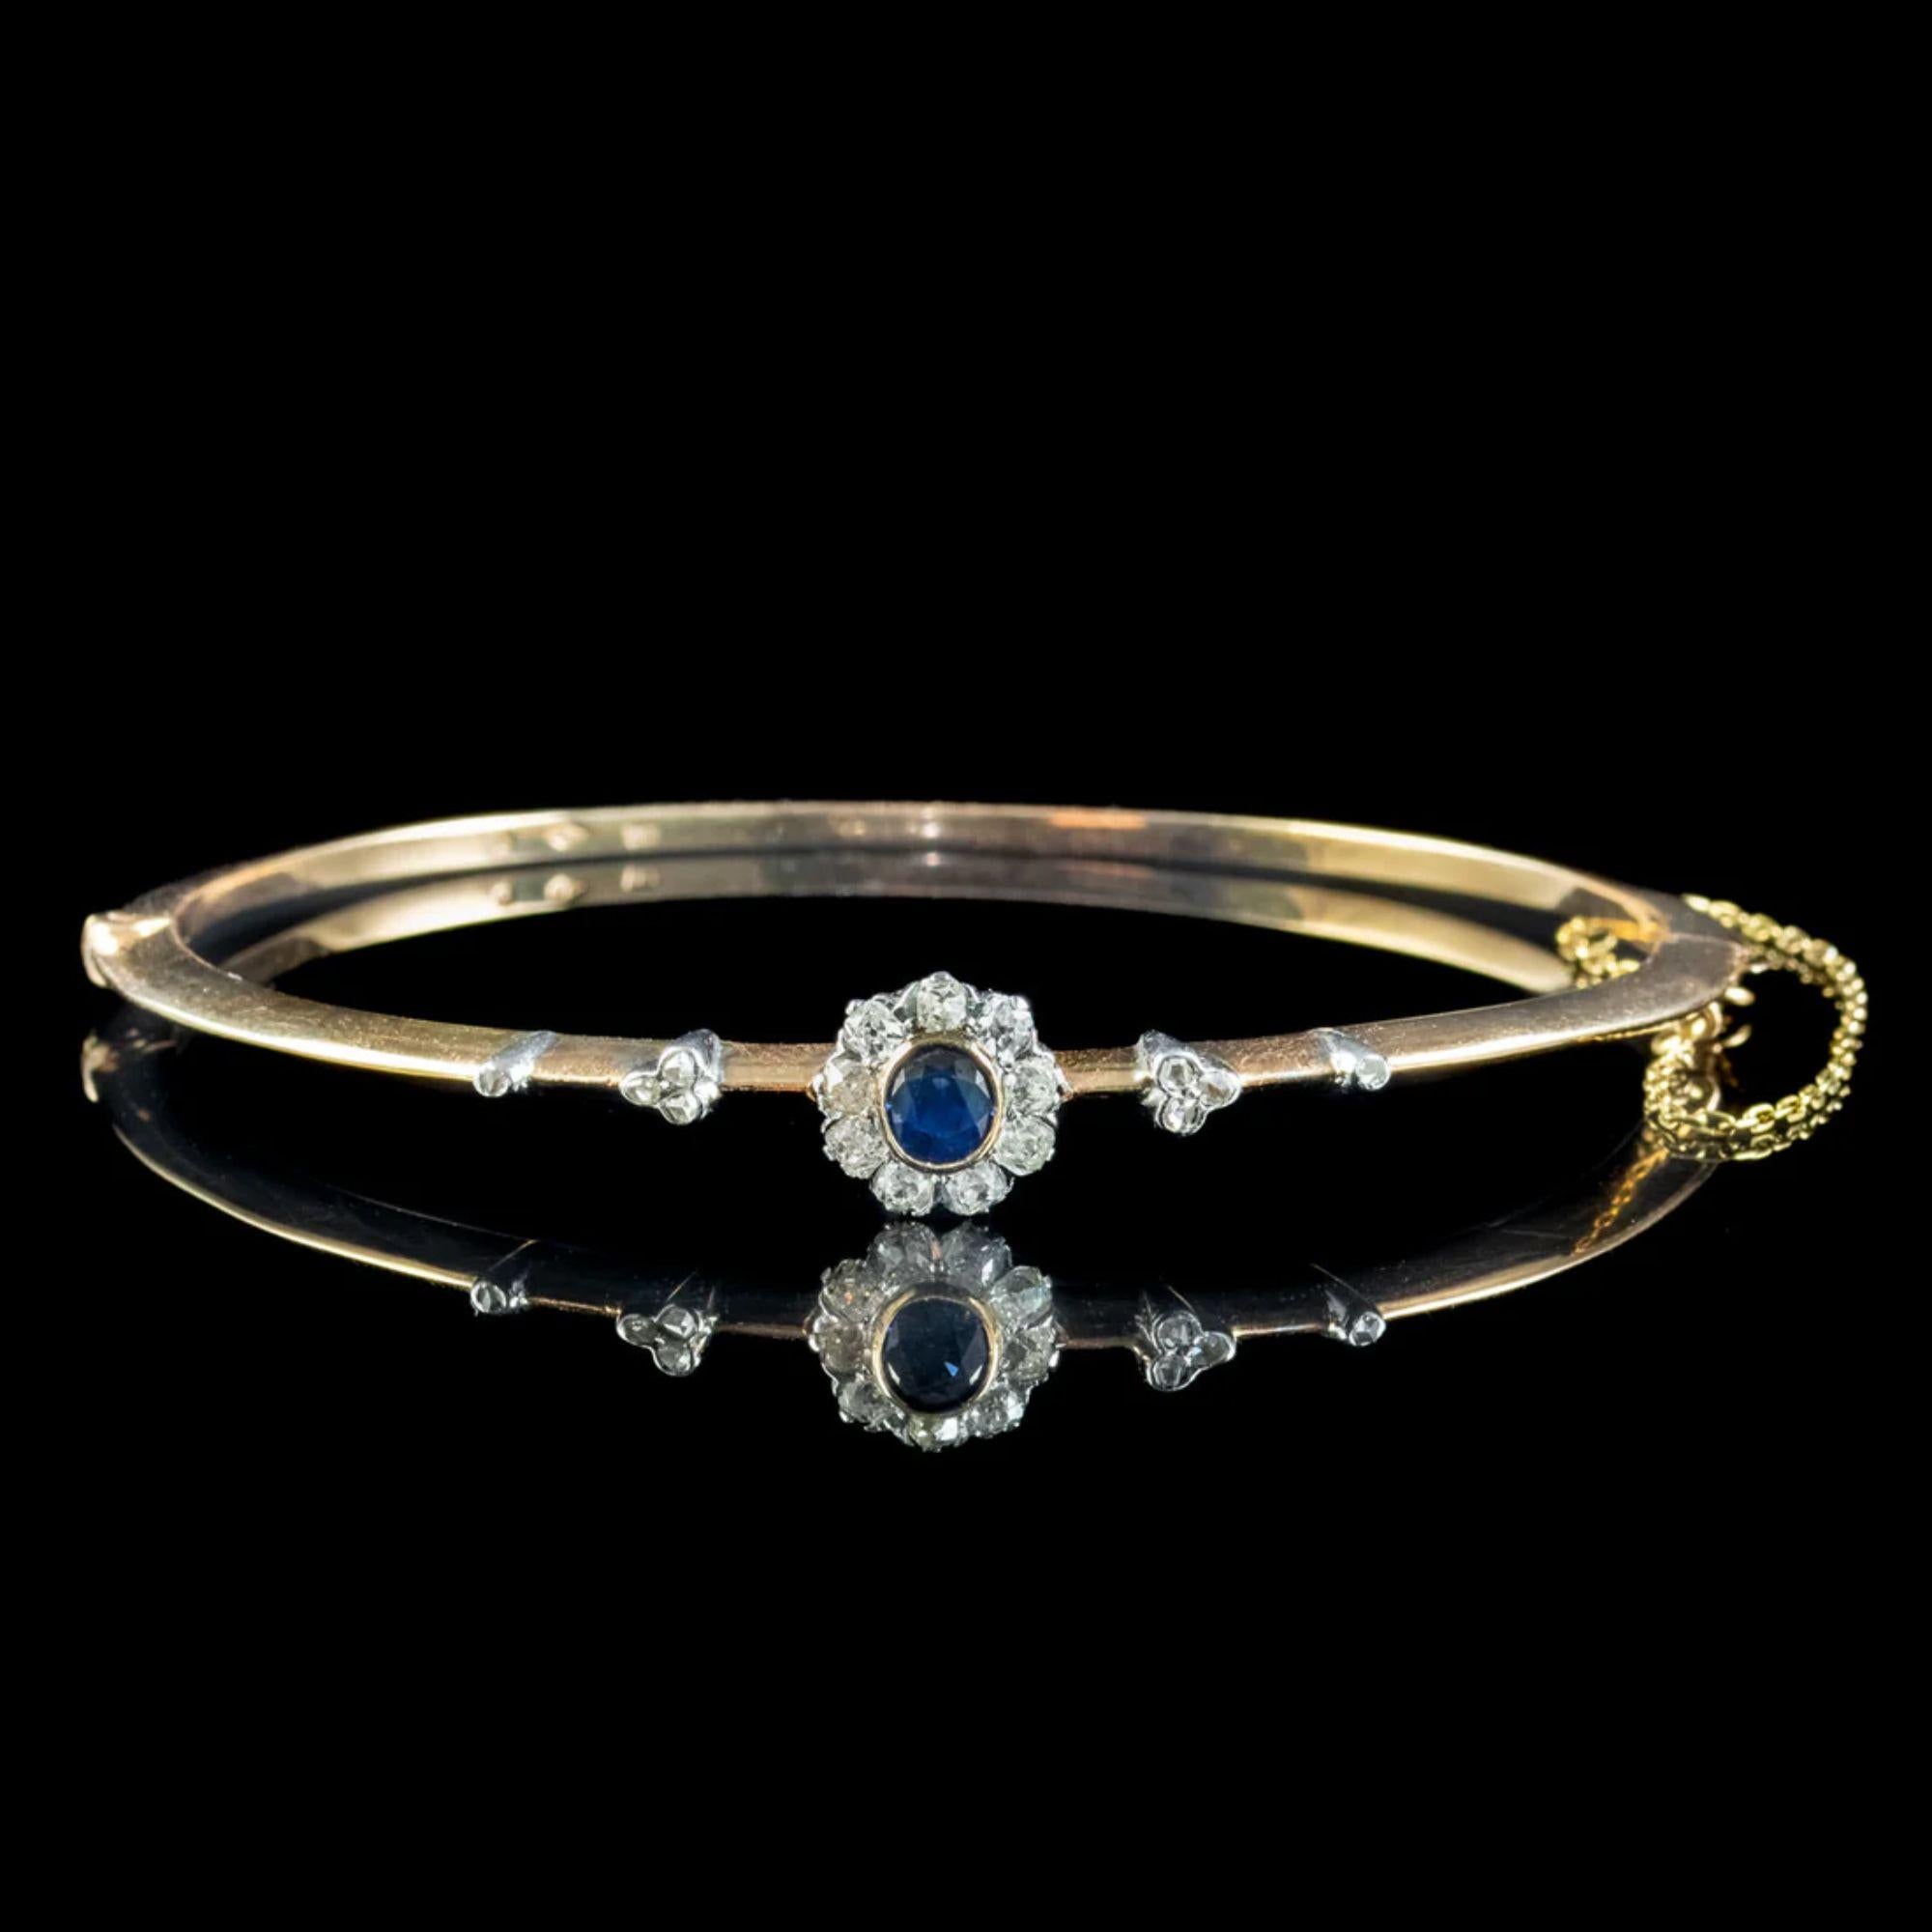 An elegant antique Austro-Hungarian bangle from the early 1900s crowned with a deep blue sapphire bezel set in the centre of a platinum flower (approx. 0.55ct). It’s complemented by a halo of nine bright cushion cut diamond petals with further